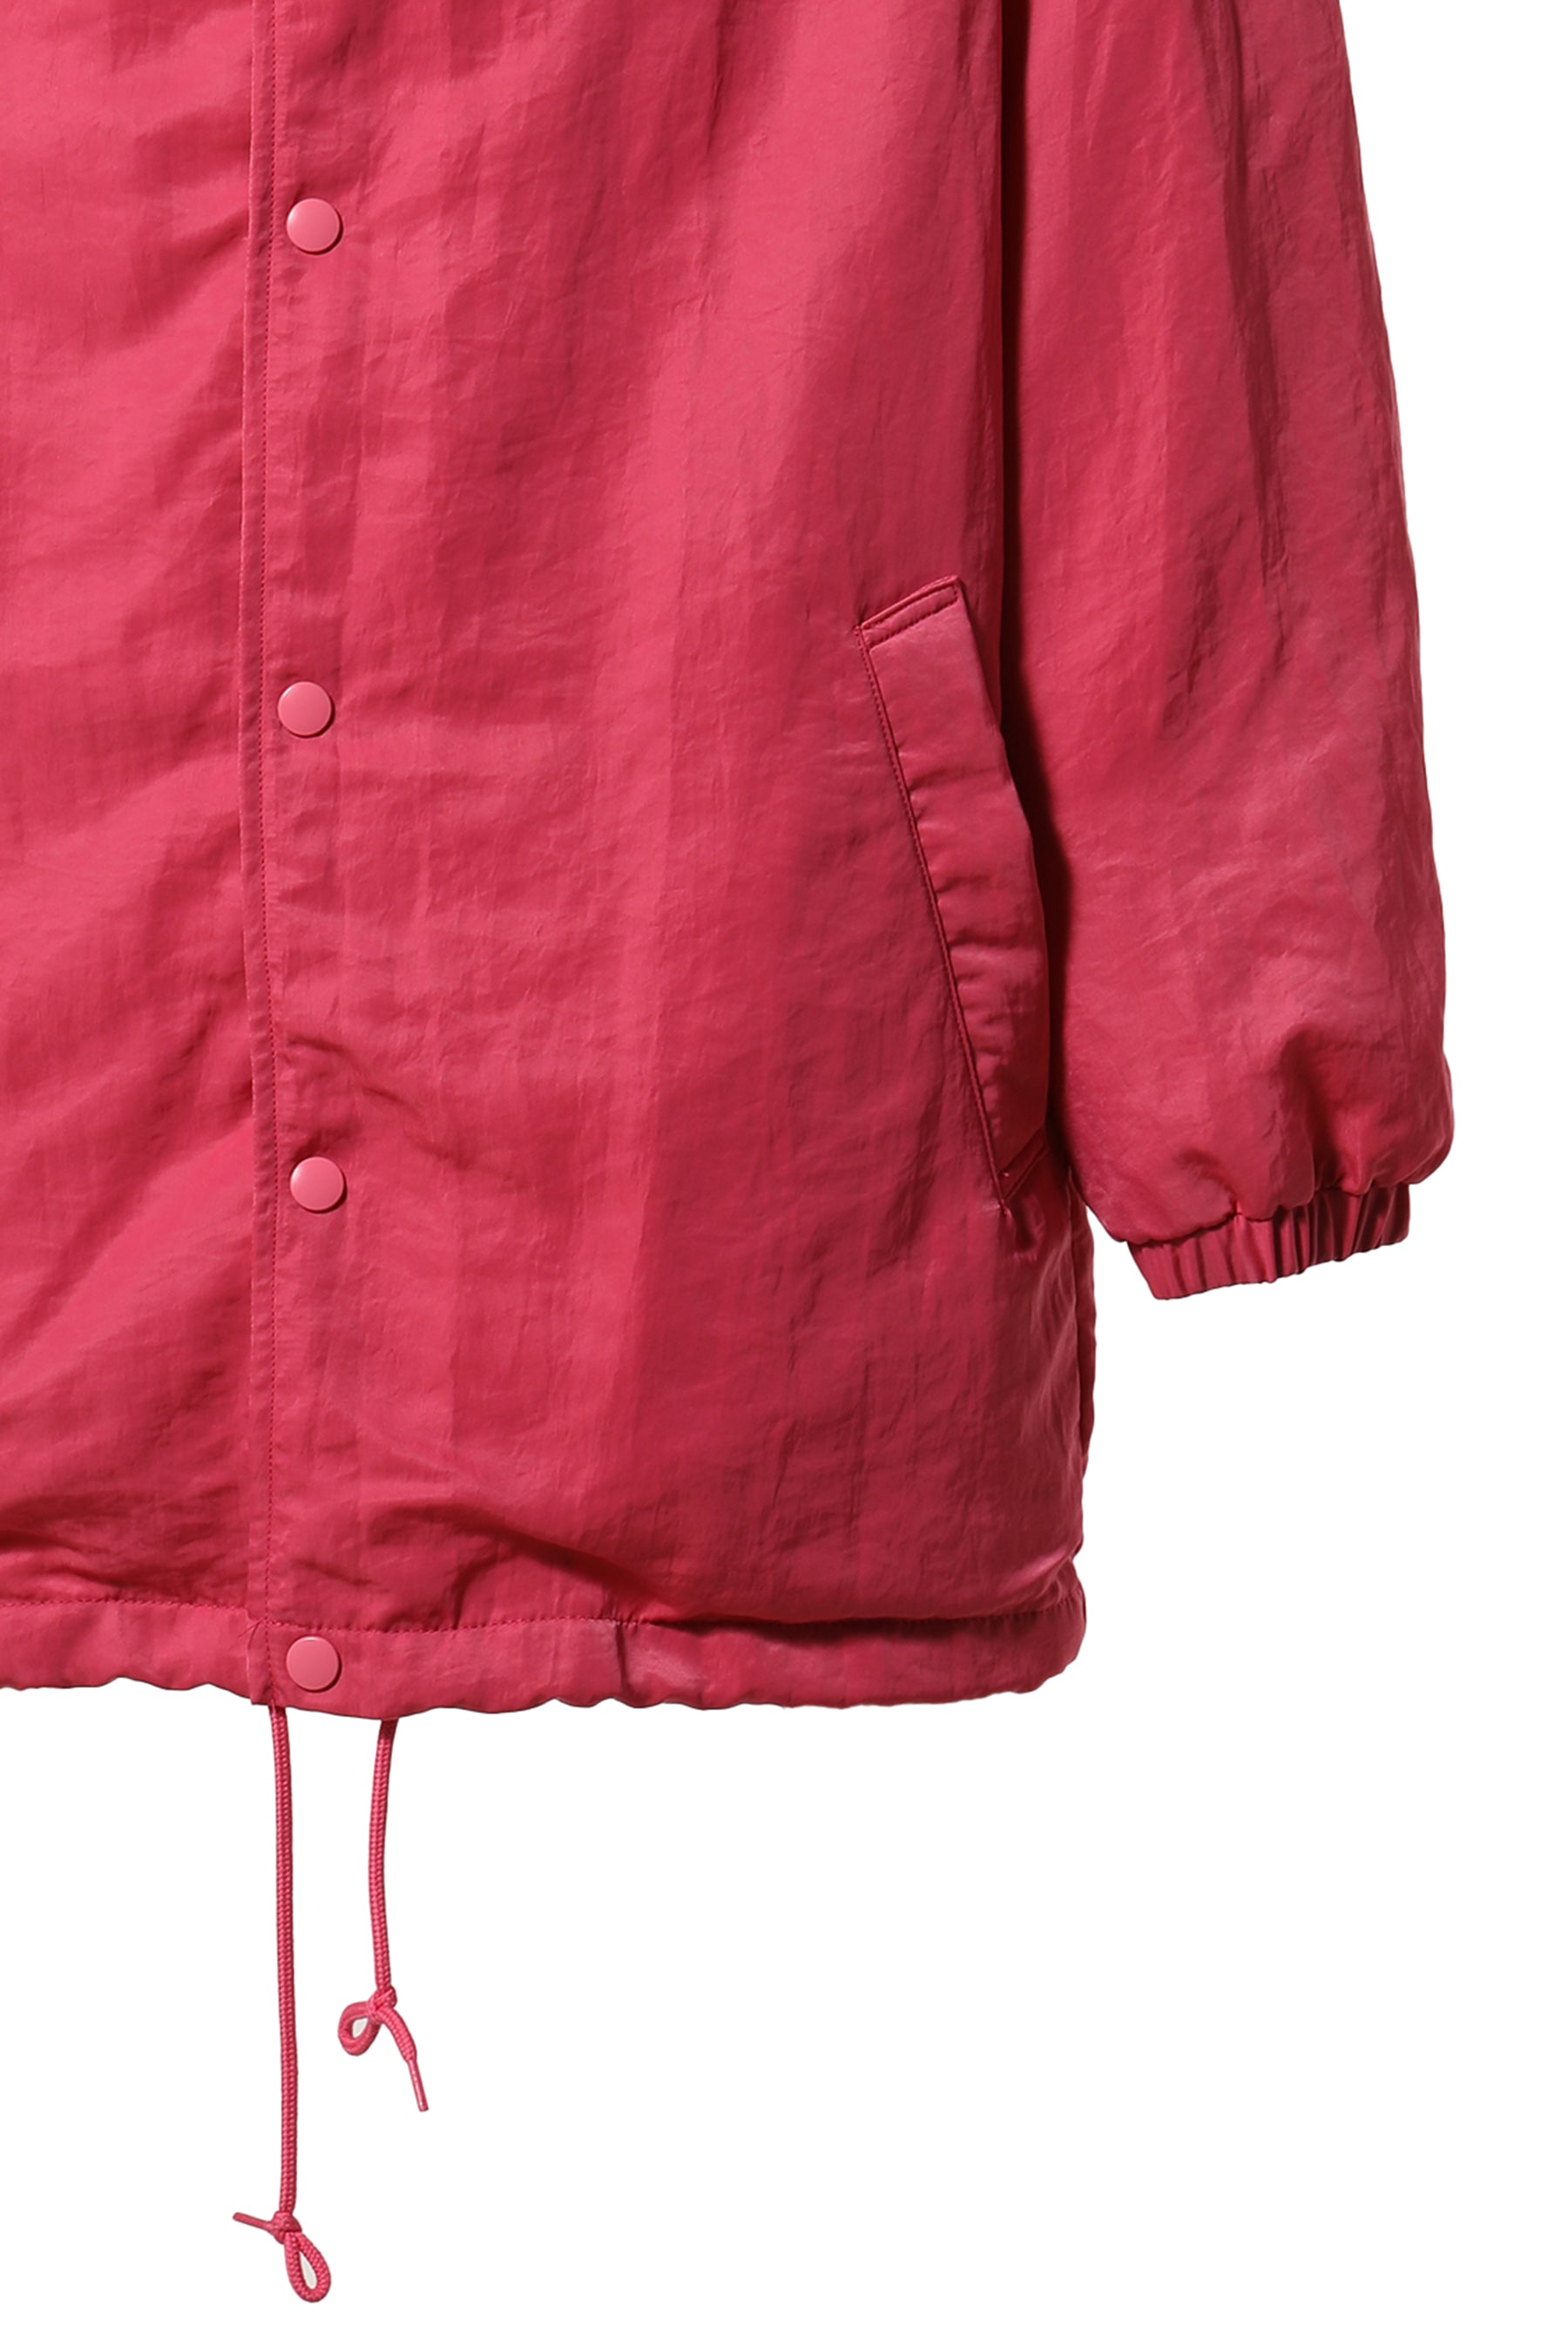 doublet ダブレット FW23 "DOUBLAND" EMBROIDERY COACH JACKET PINK -NUBIAN